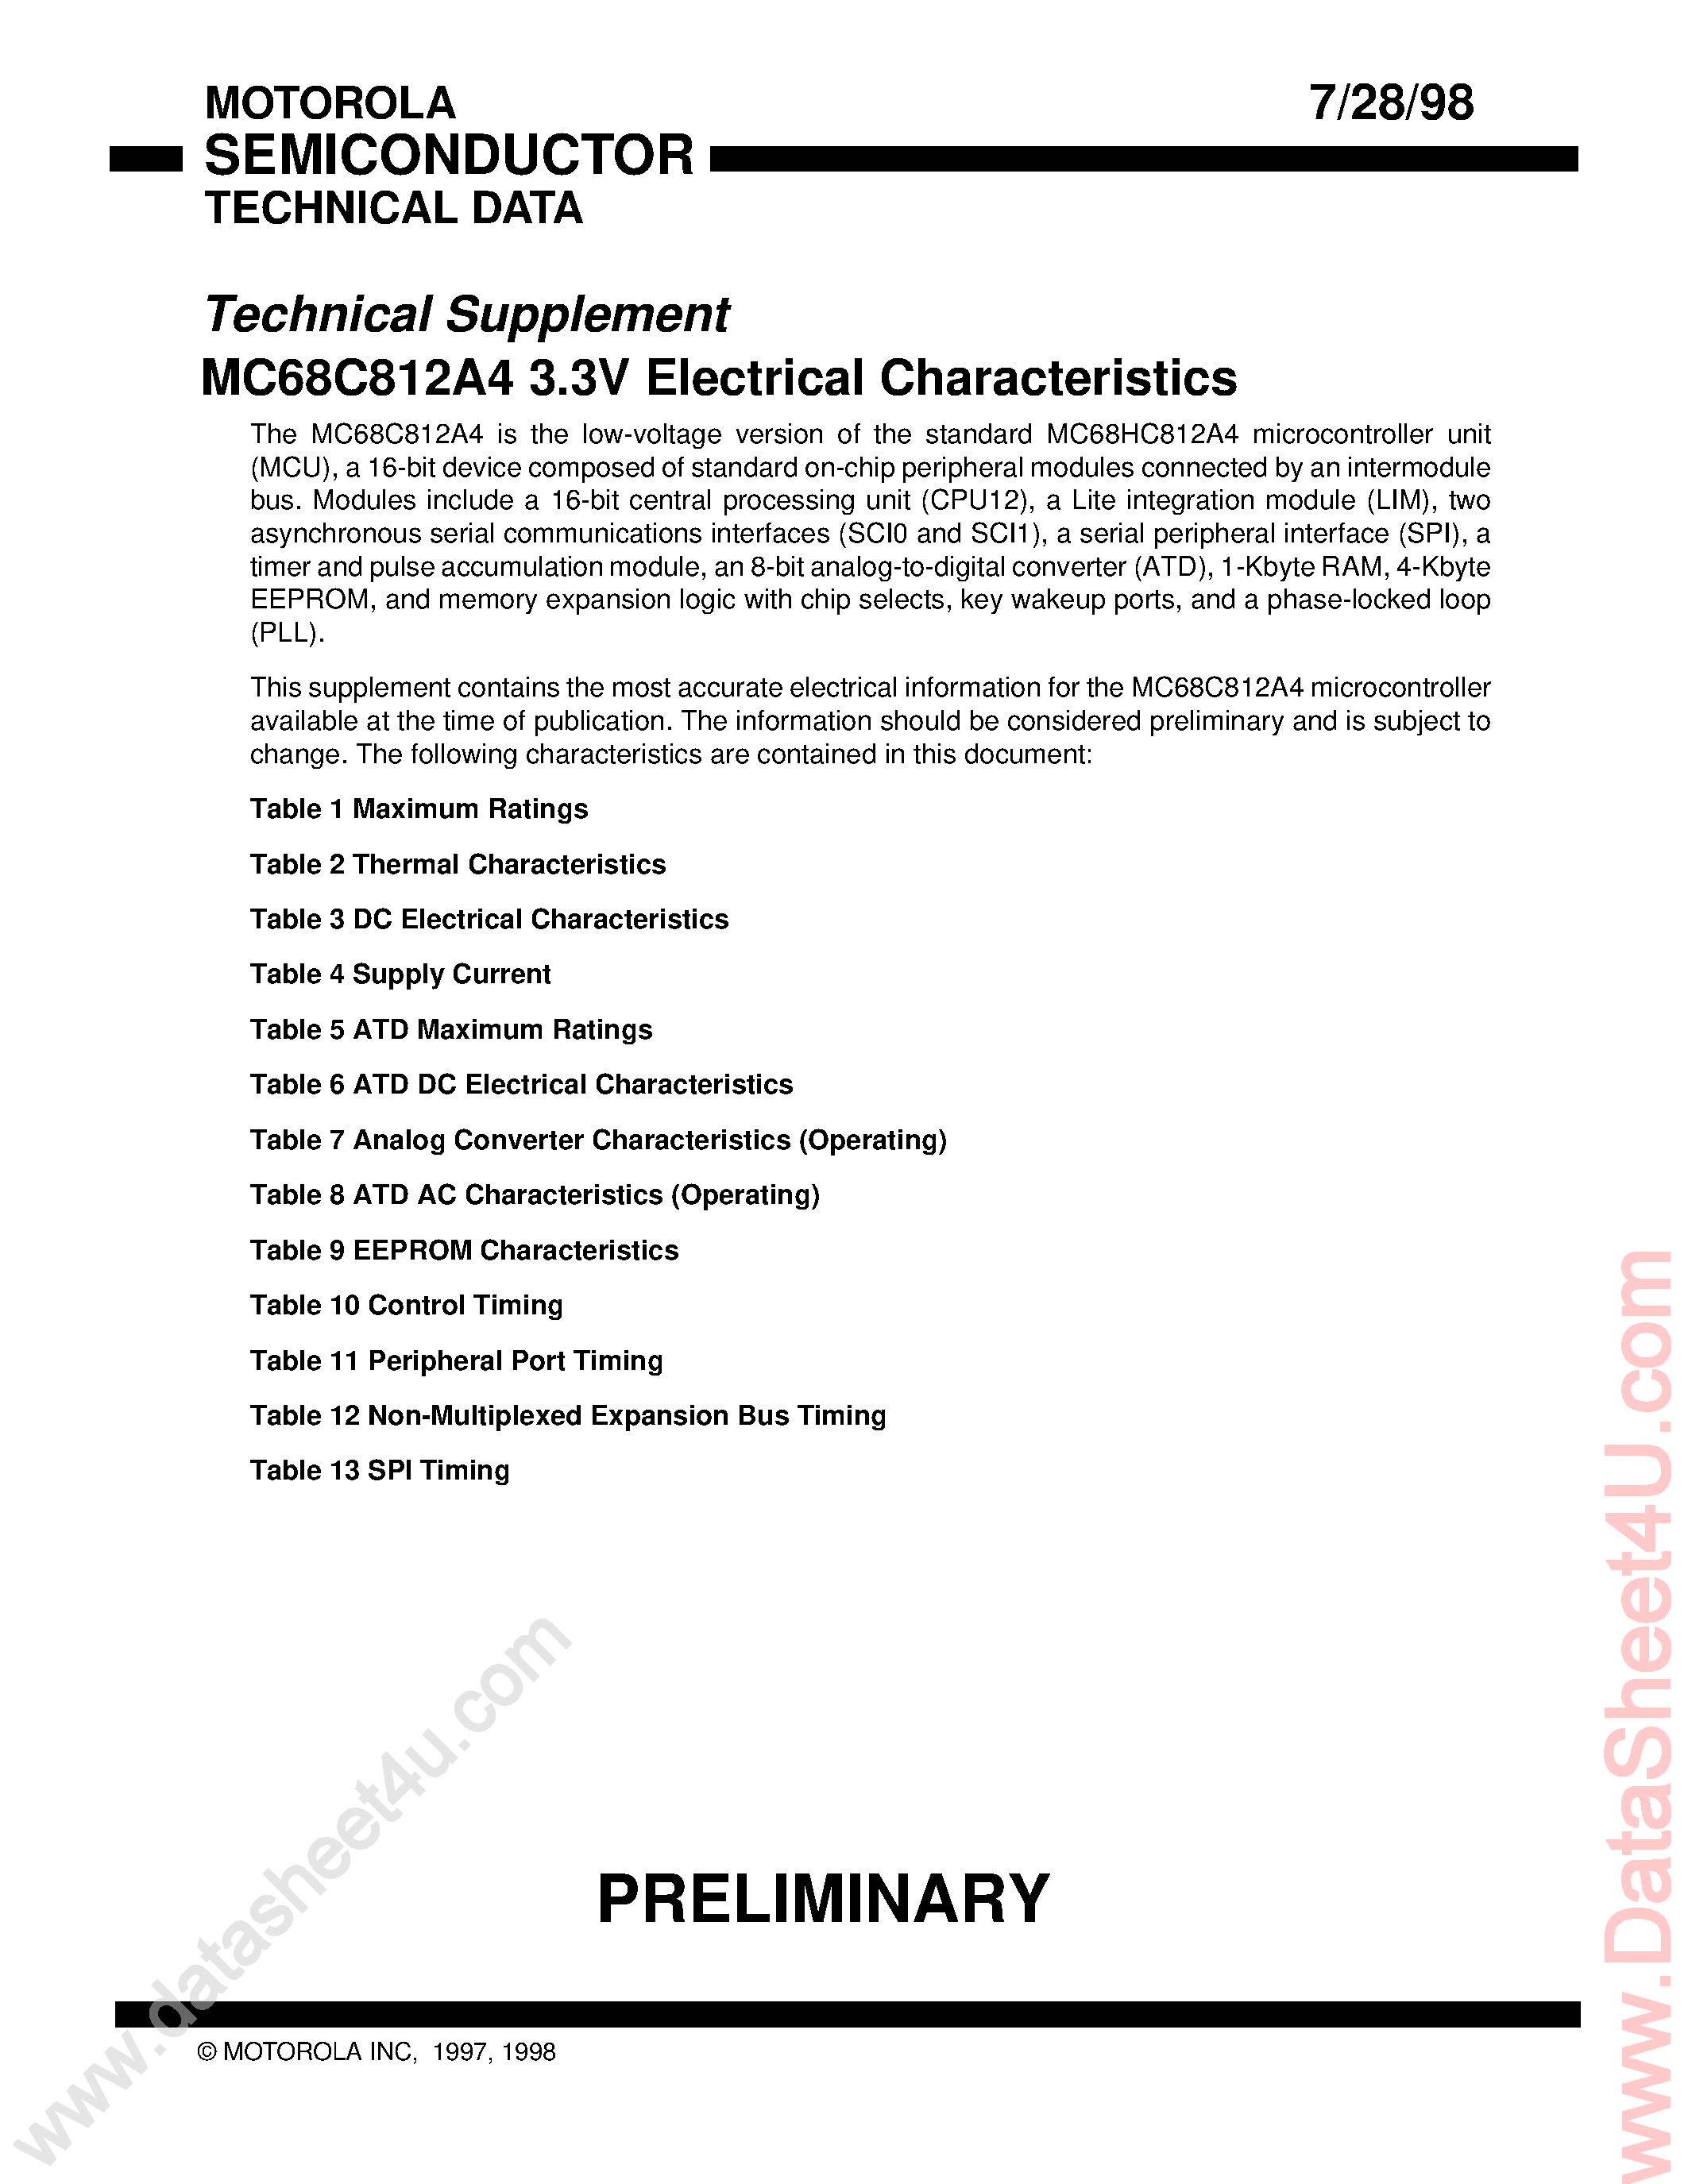 Datasheet XC68HC812A4 - Technical Suppliment Document Covering The 3 V Version of The 812A4 page 1